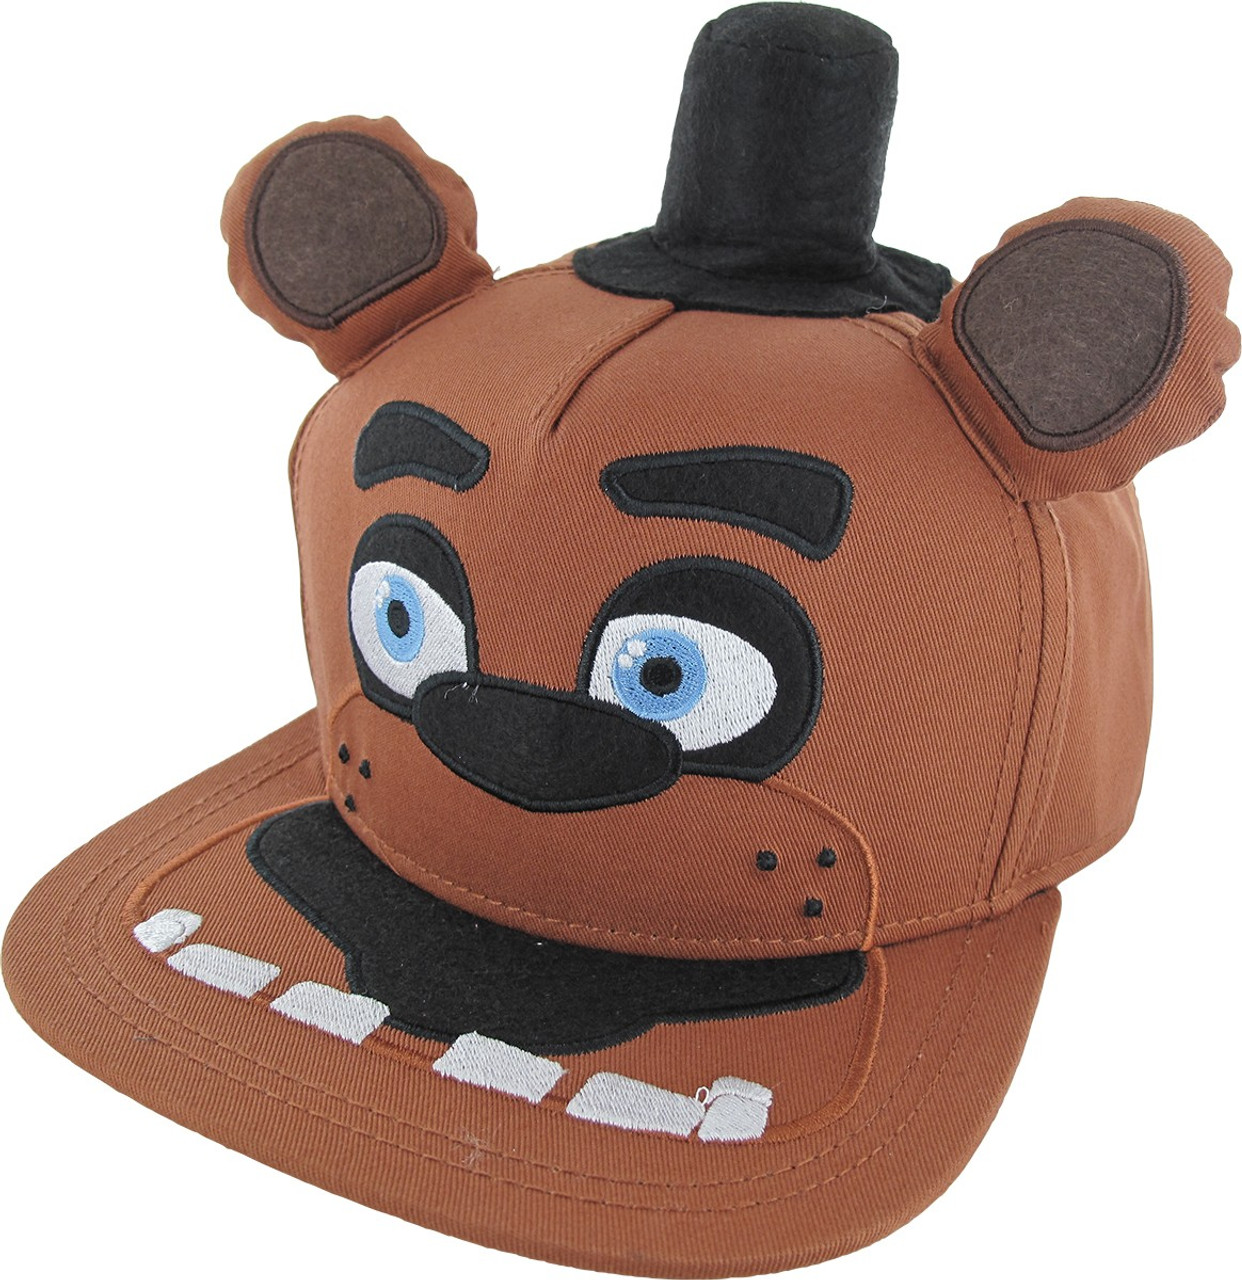 Five Nights At Freddy's Stitched Character Snapback Hat